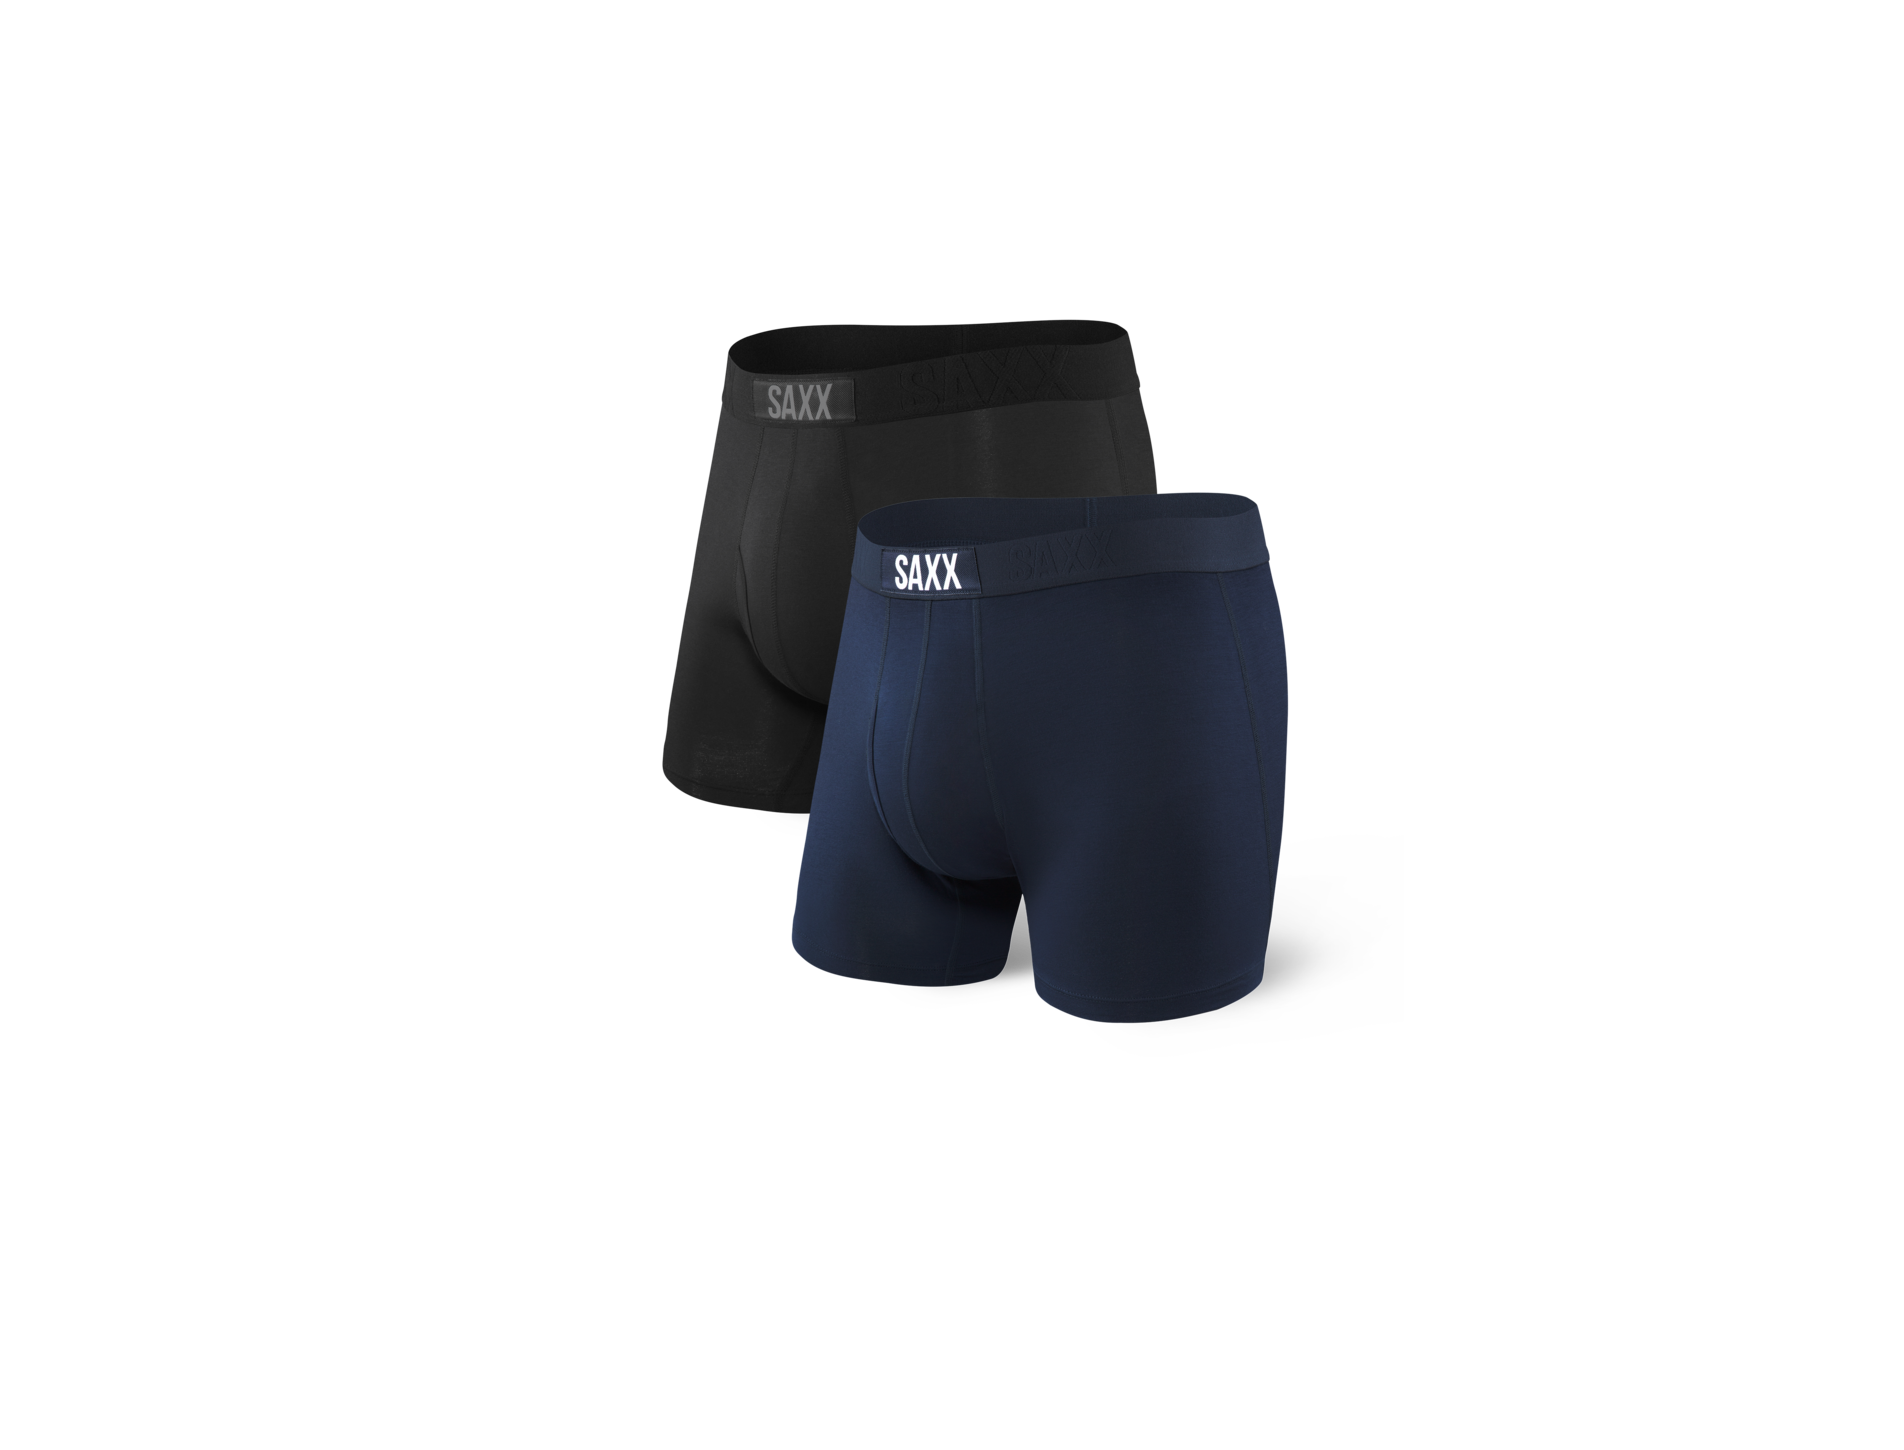 SAXX Boxer Brief 2 Pack Black/Navy - Penners